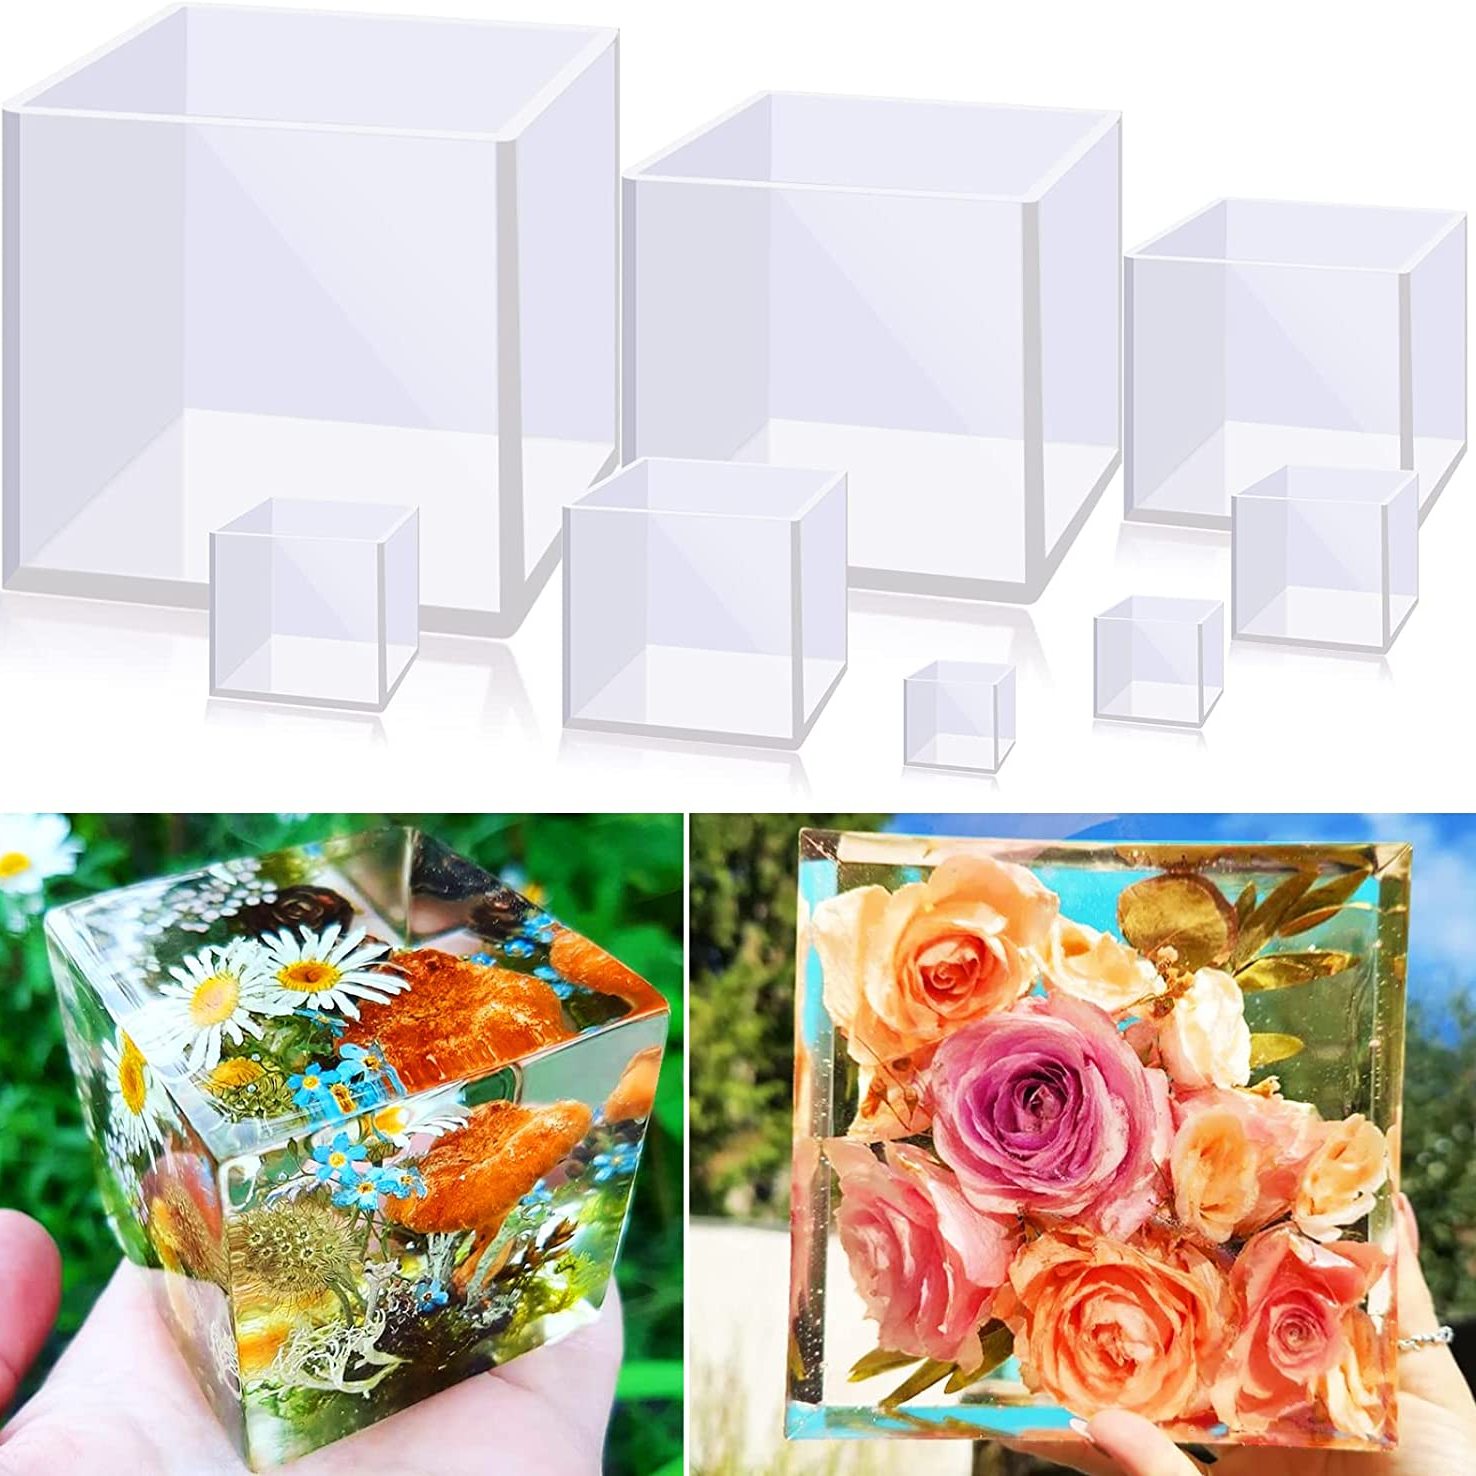 Silicone Mold Resin Molds For Flowers Preservation Diy Wedding Valentine  Anniversary Gift Home Decors Cube (with wooden box)